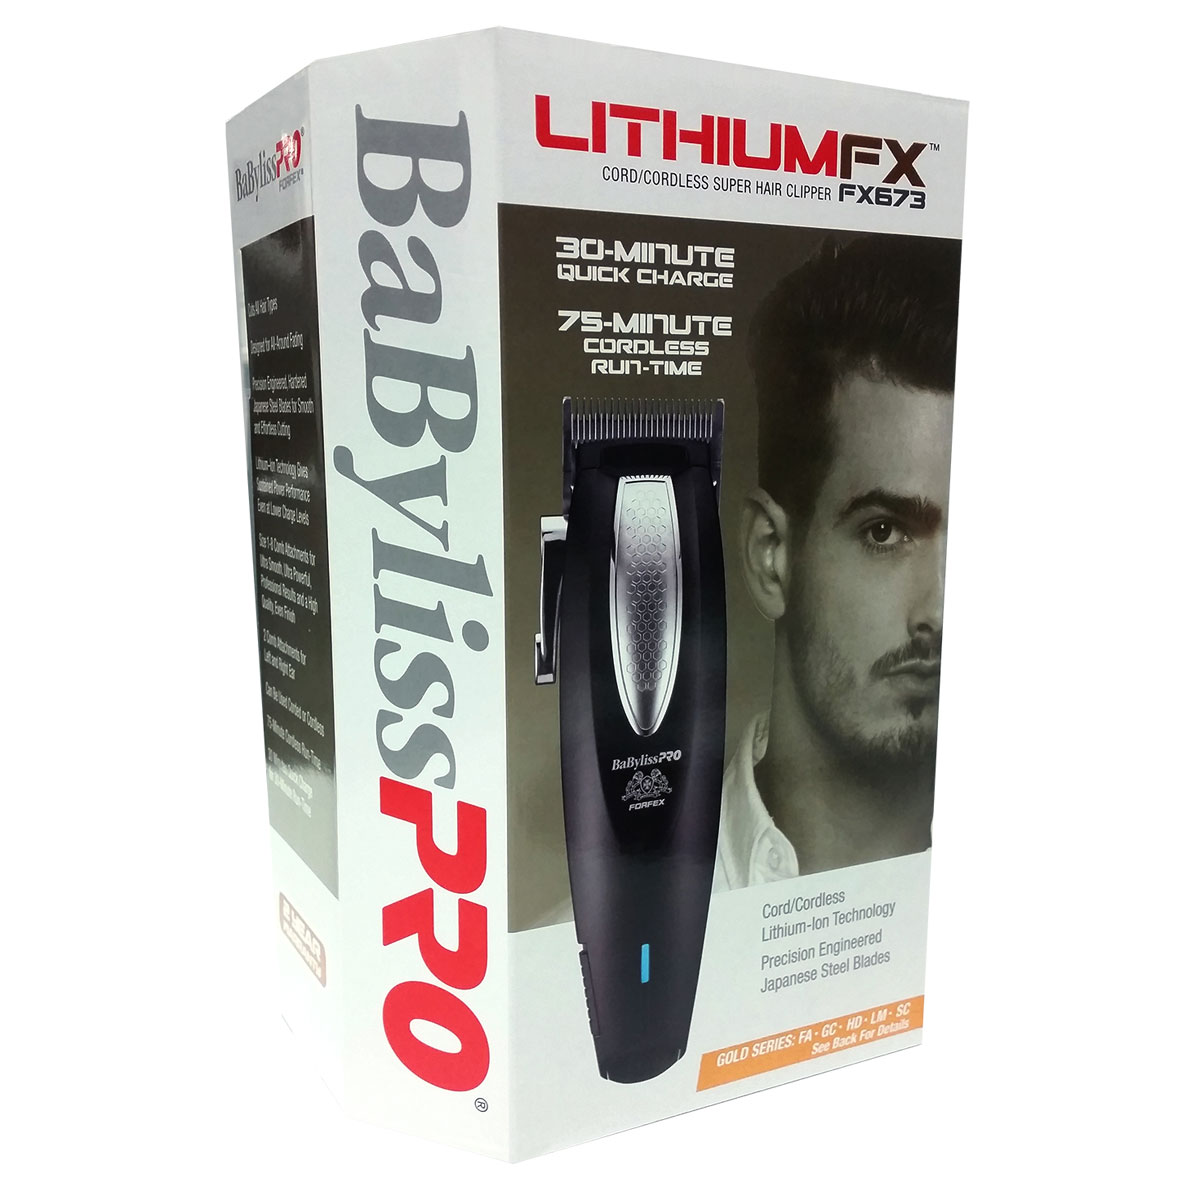 forfex babyliss pro fx 686